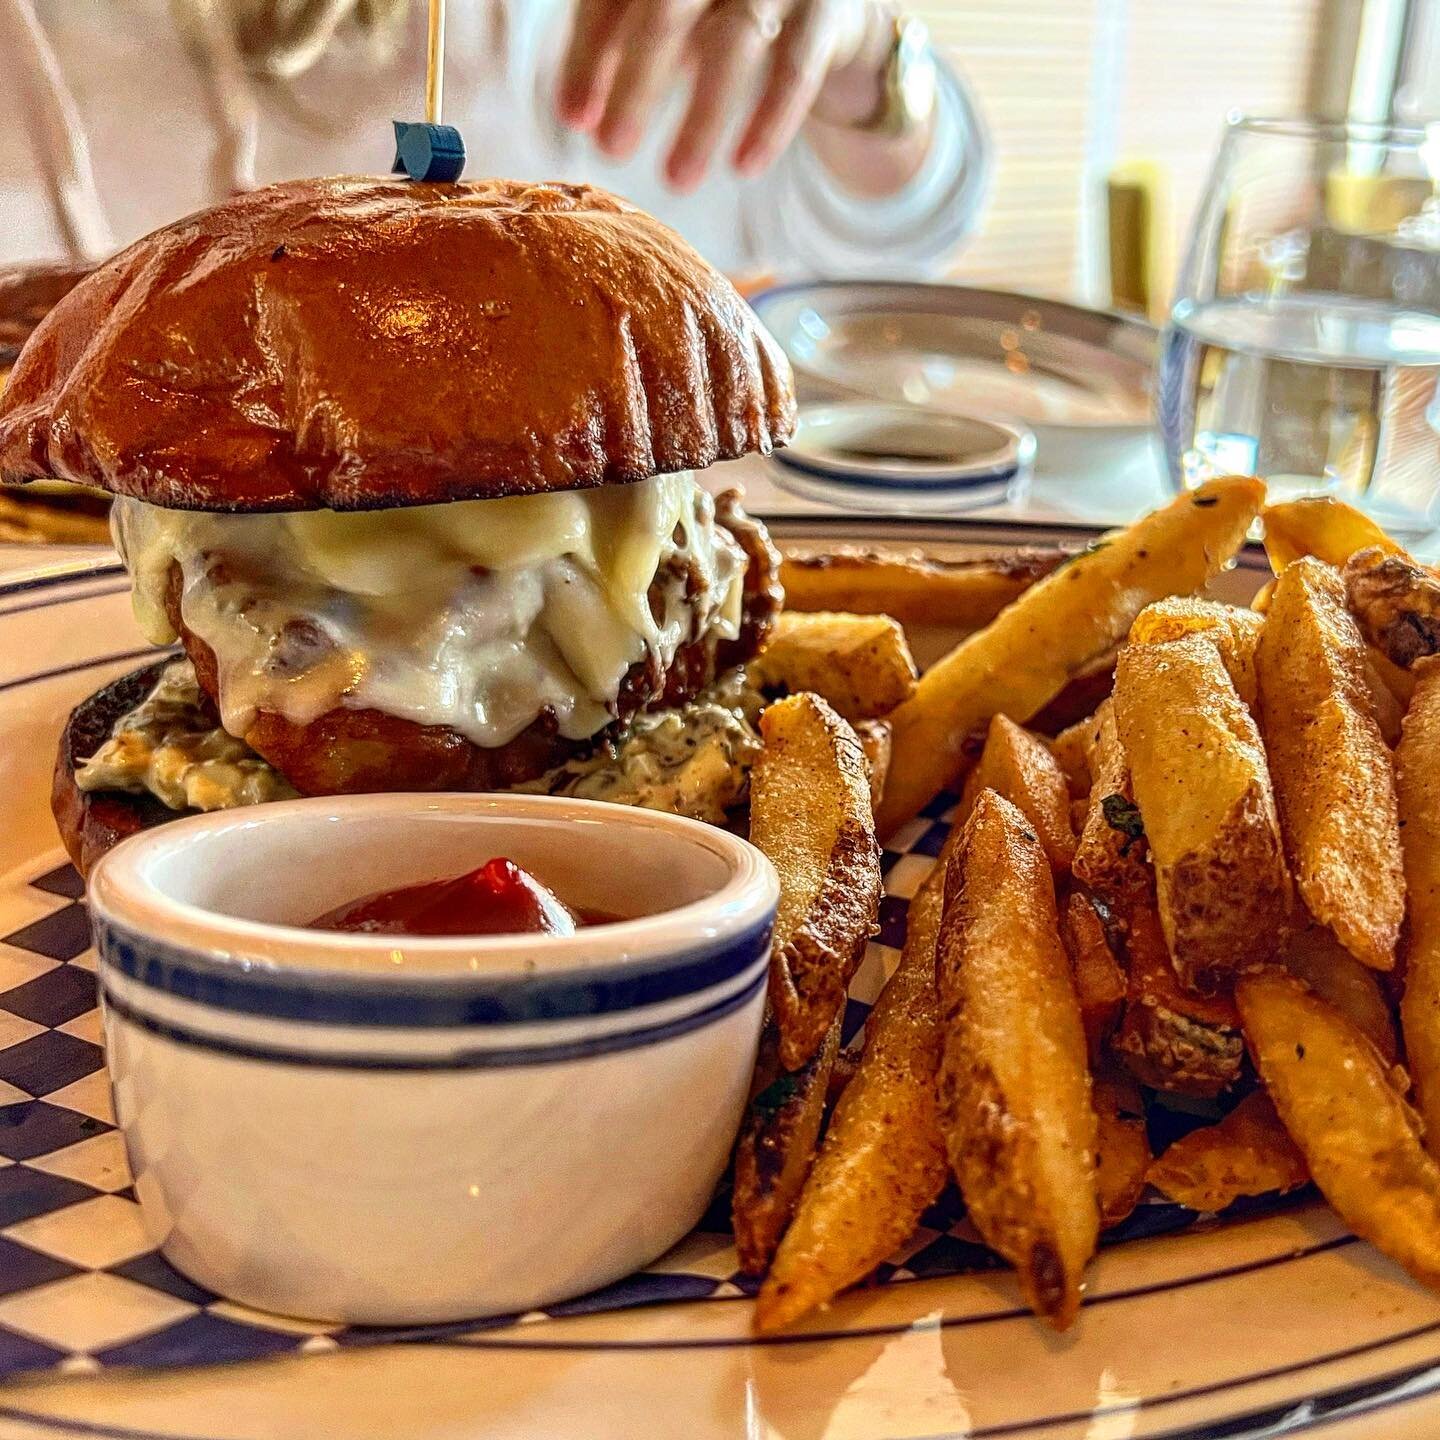 On Sundays, we eat fish sandwiches and fries at brunch ☀️ 

Reservations:  DINNER &mdash; Weds-Sun and SUNDAY BRUNCH on Resy.  Bar first come, first served.  Private dining room, email info@dearjanesla.com
.
.
.
.
.
#oldhollywood #oldschool #dearjane